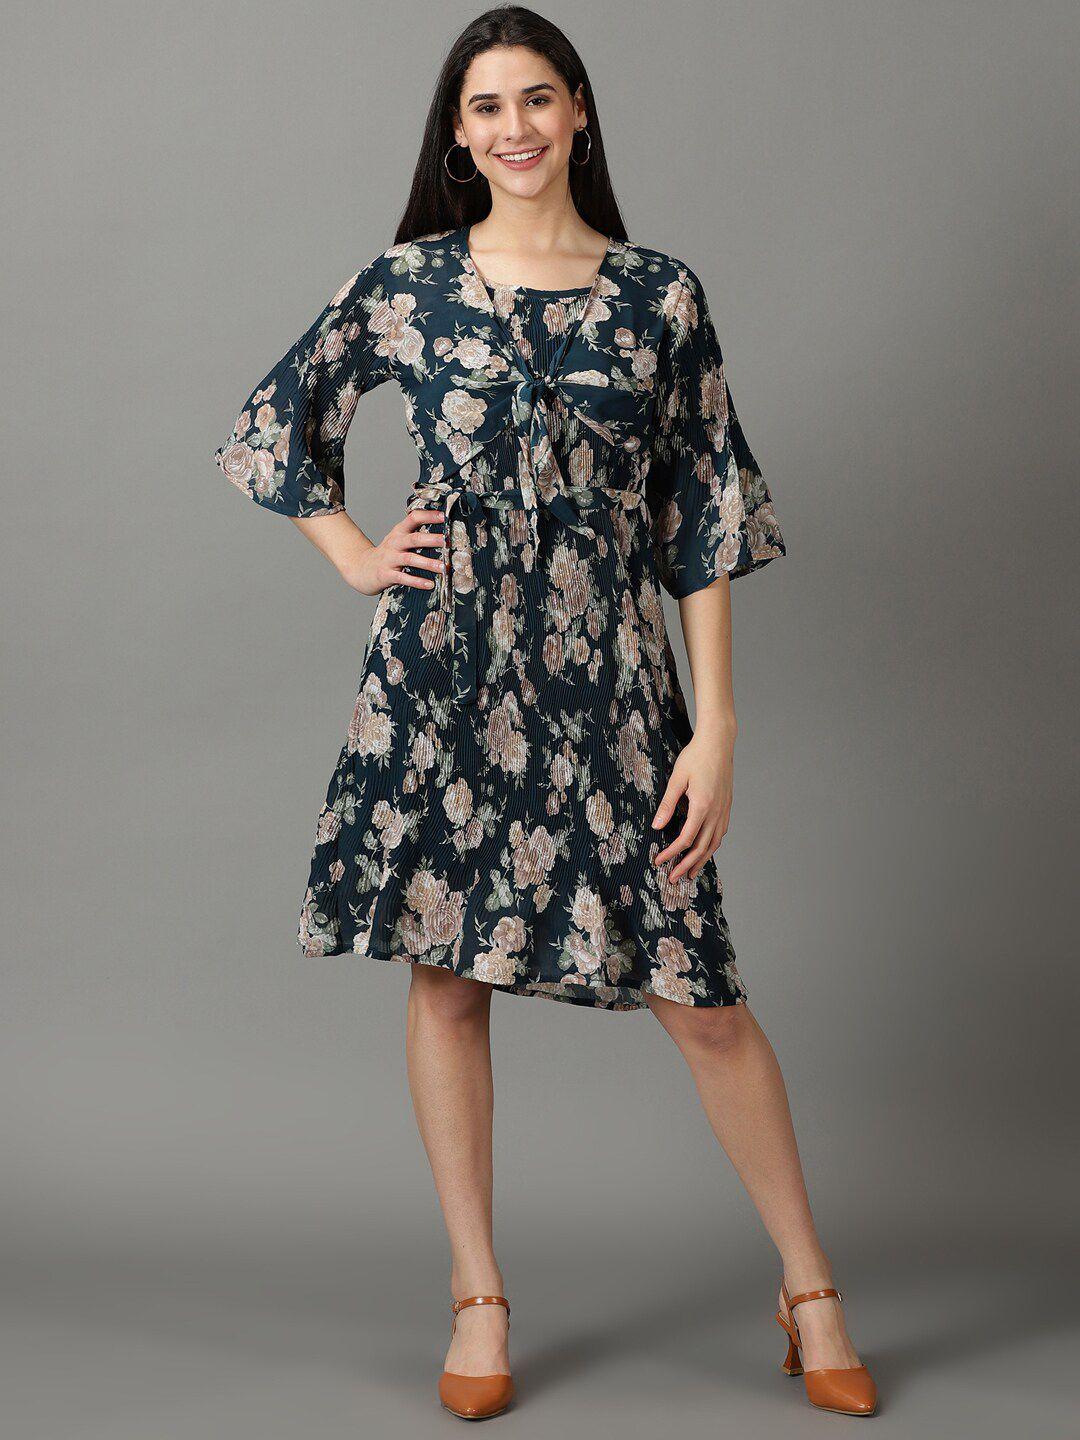 showoff-floral-printed-accordion-pleats-fit-&-flare-dress